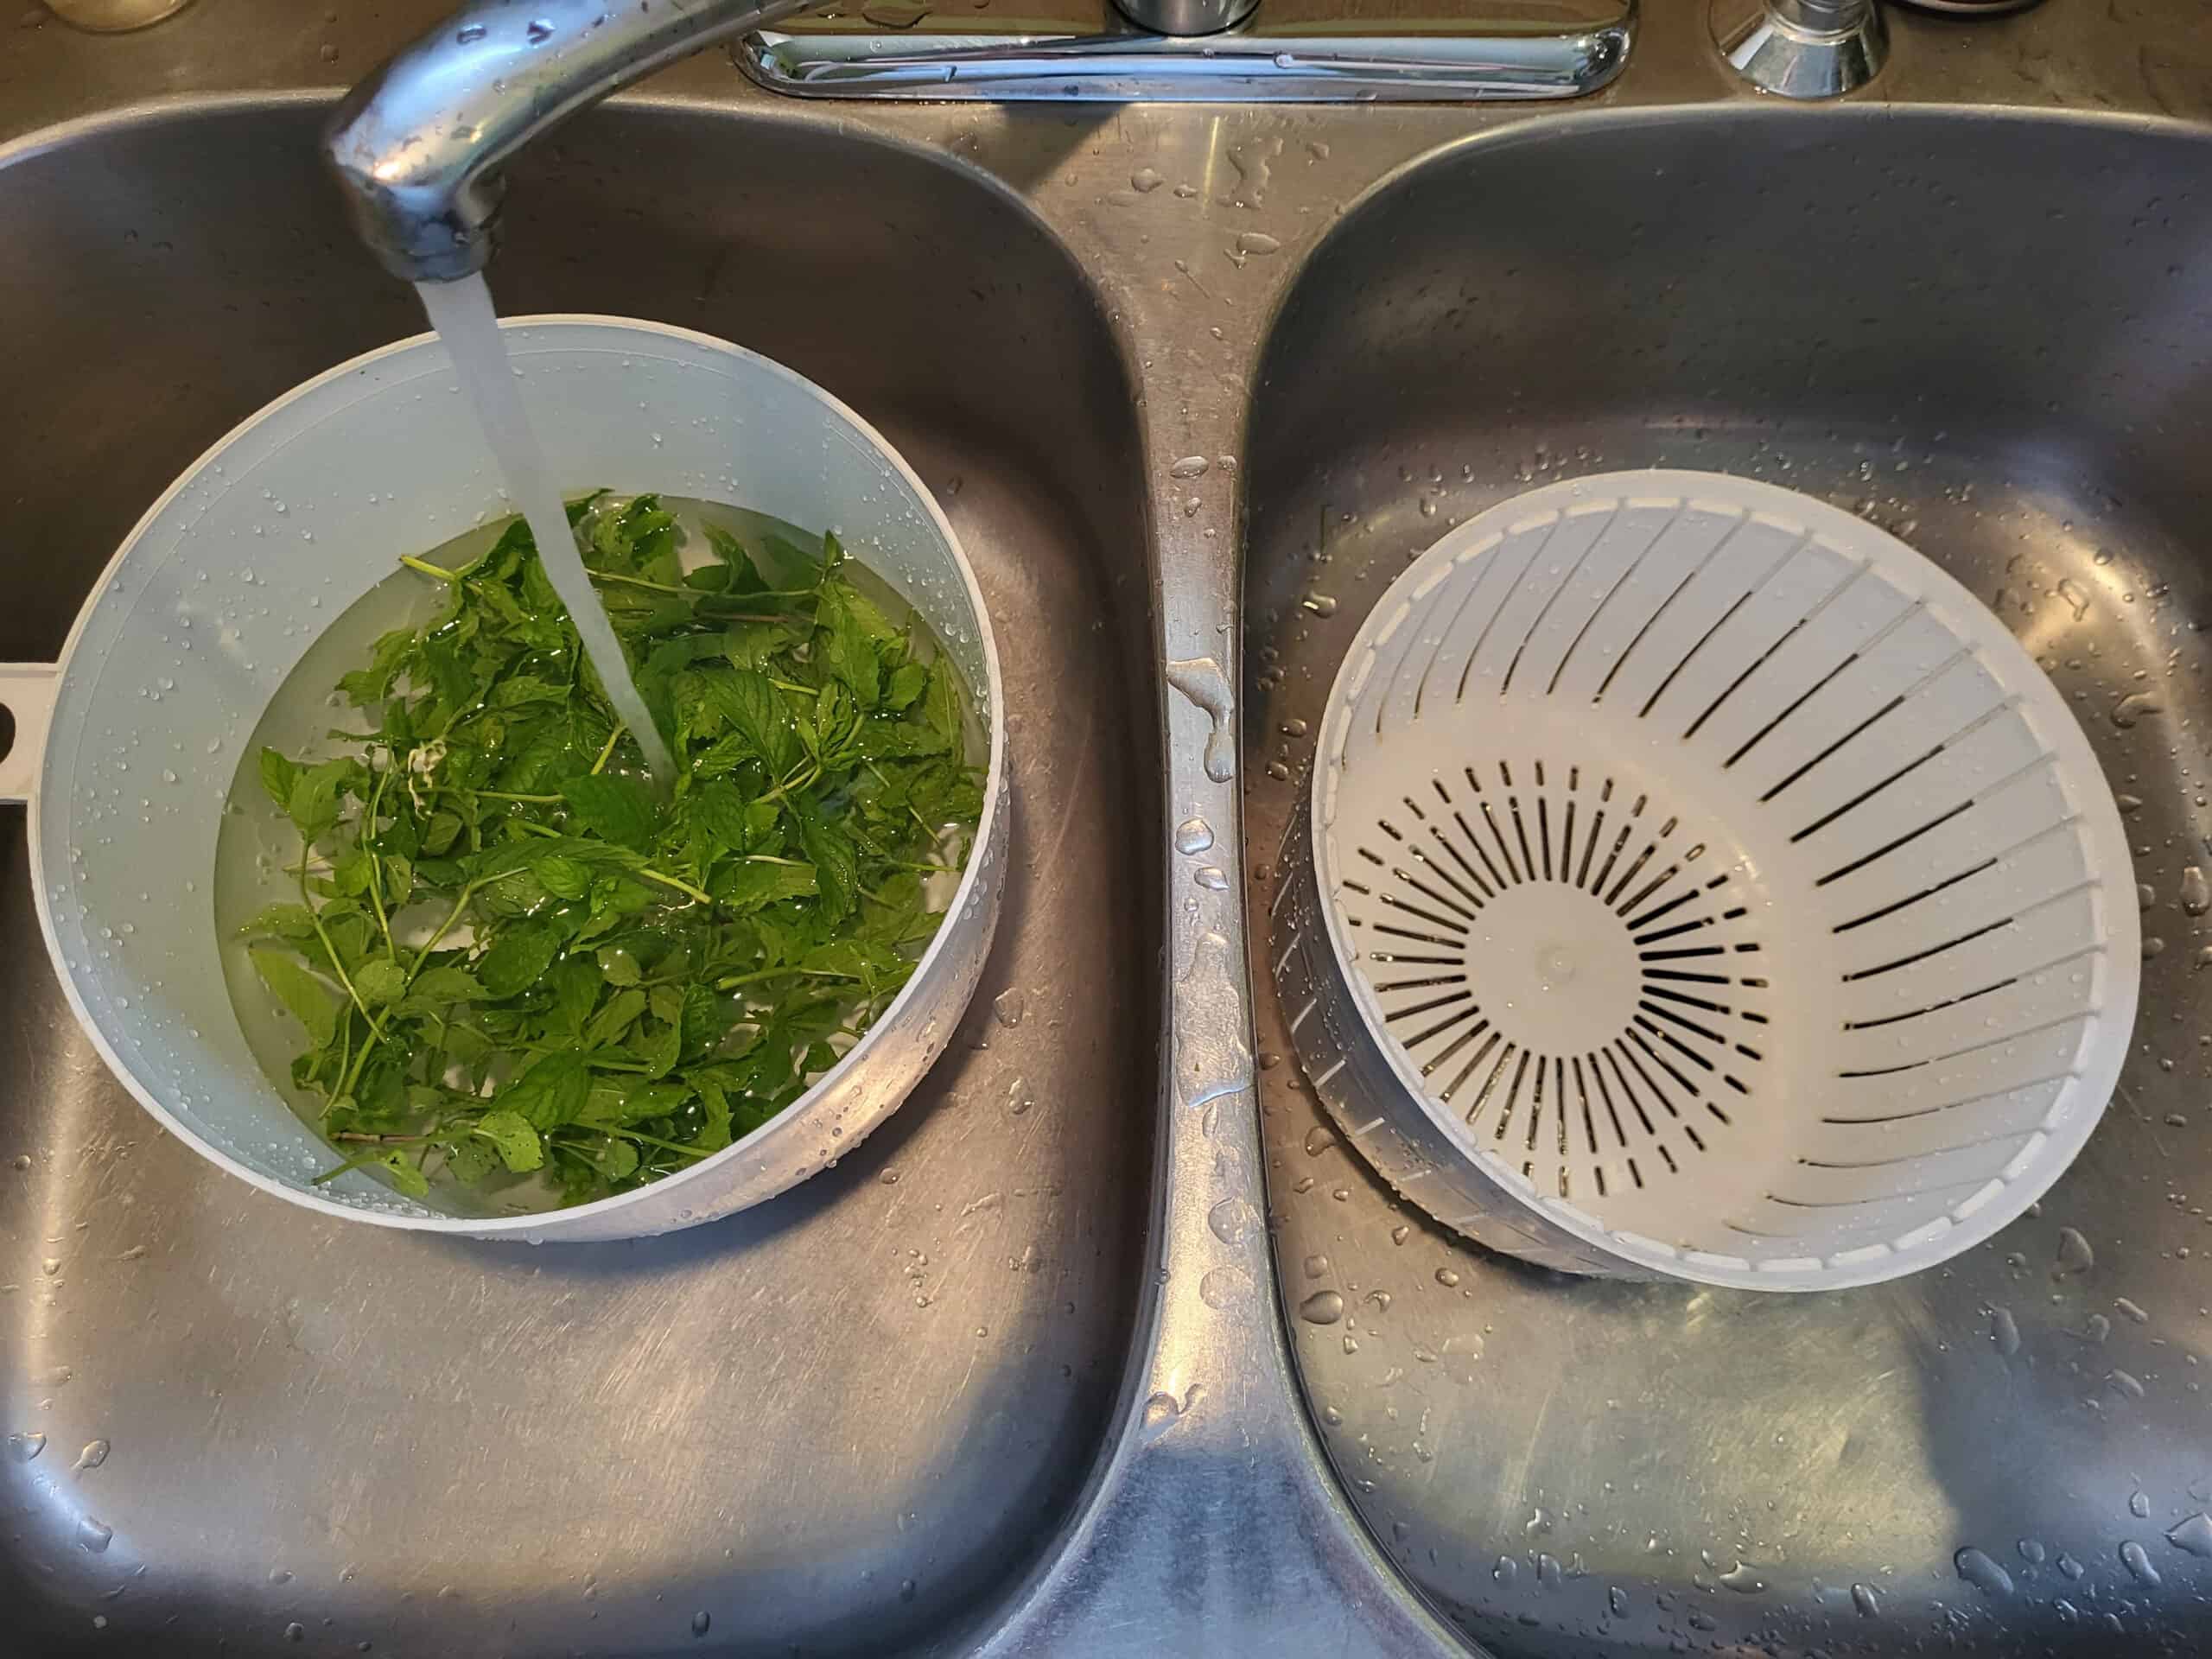 Time to clean the herbs in cool, clean tap water using plenty of water to flush away debris.